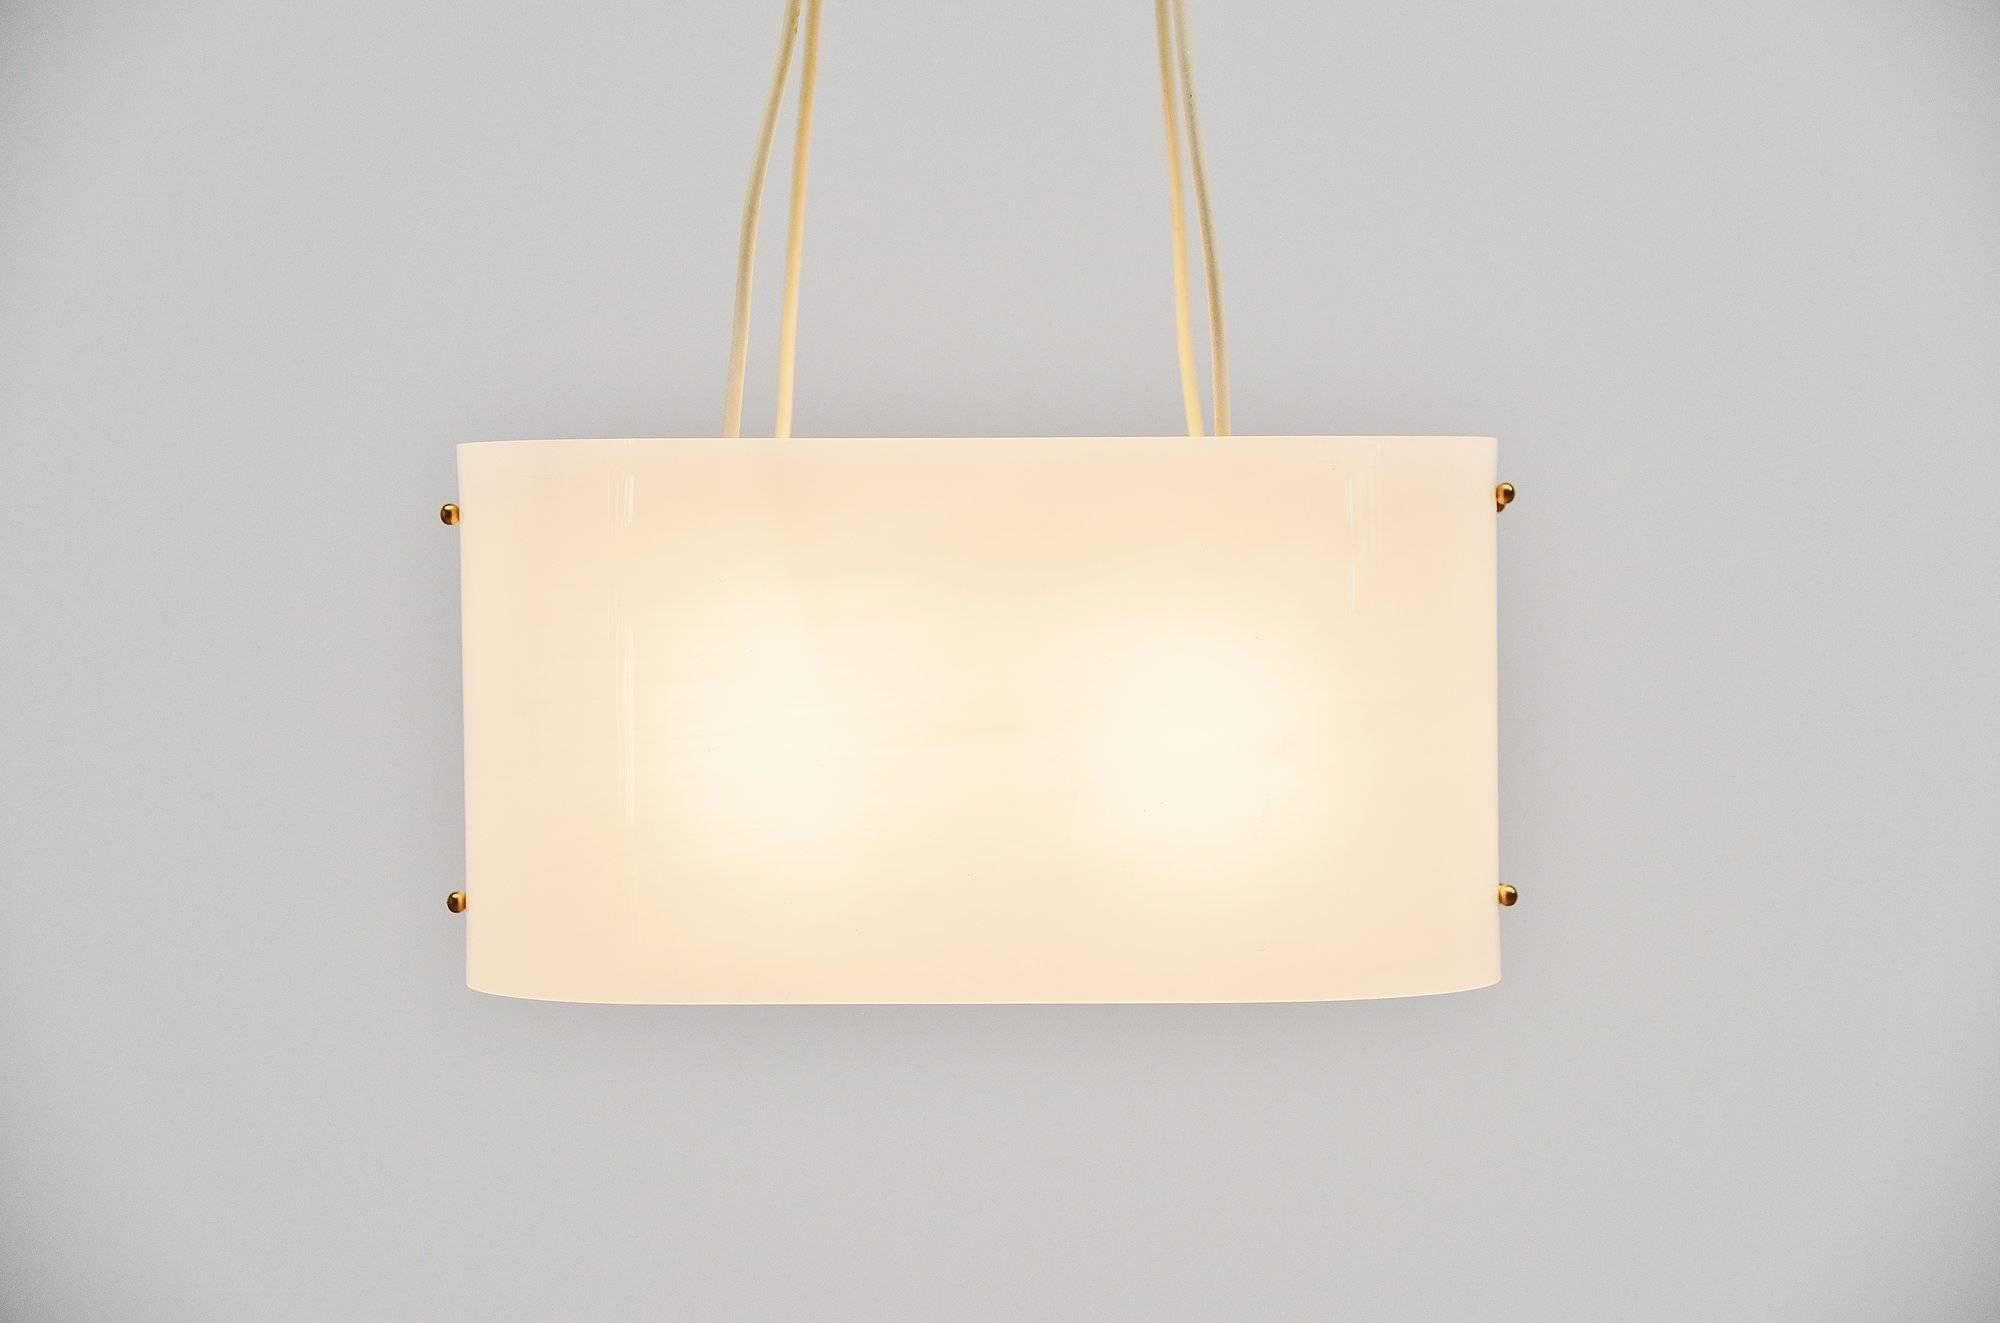 Very nice pendant lamp made by unknown designer or manufacturer in Italy, 1960. The lamp has a metal frame with two bent plexiglass shades, finished with brass knobs. Very nice and well-made pendant lamp that can be attributed to Arredoluce,